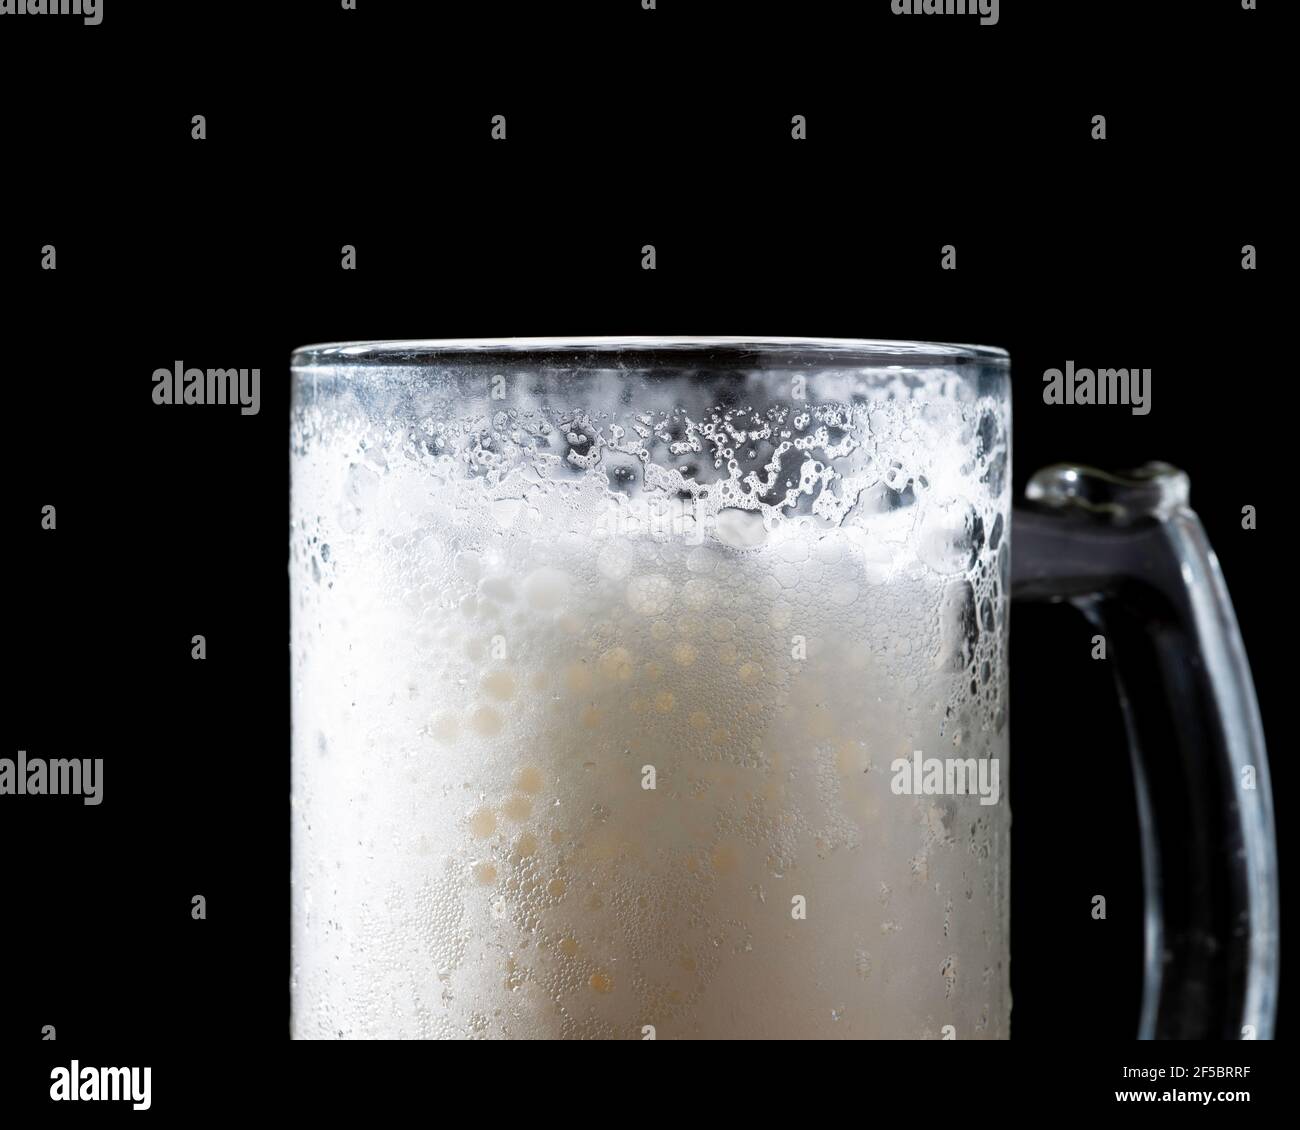 a mug of beer on a black background Stock Photo